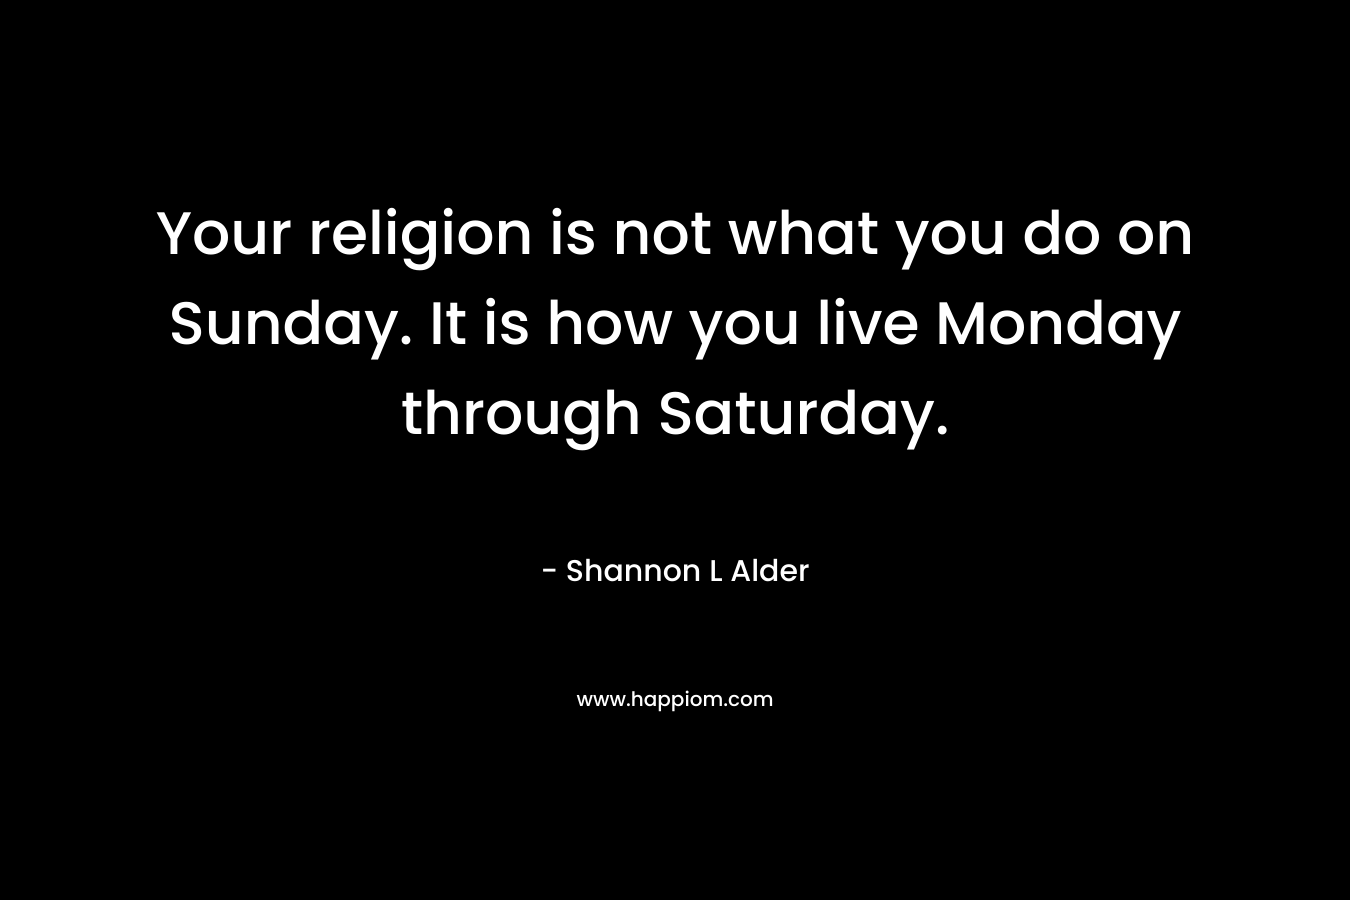 Your religion is not what you do on Sunday. It is how you live Monday through Saturday. – Shannon L Alder